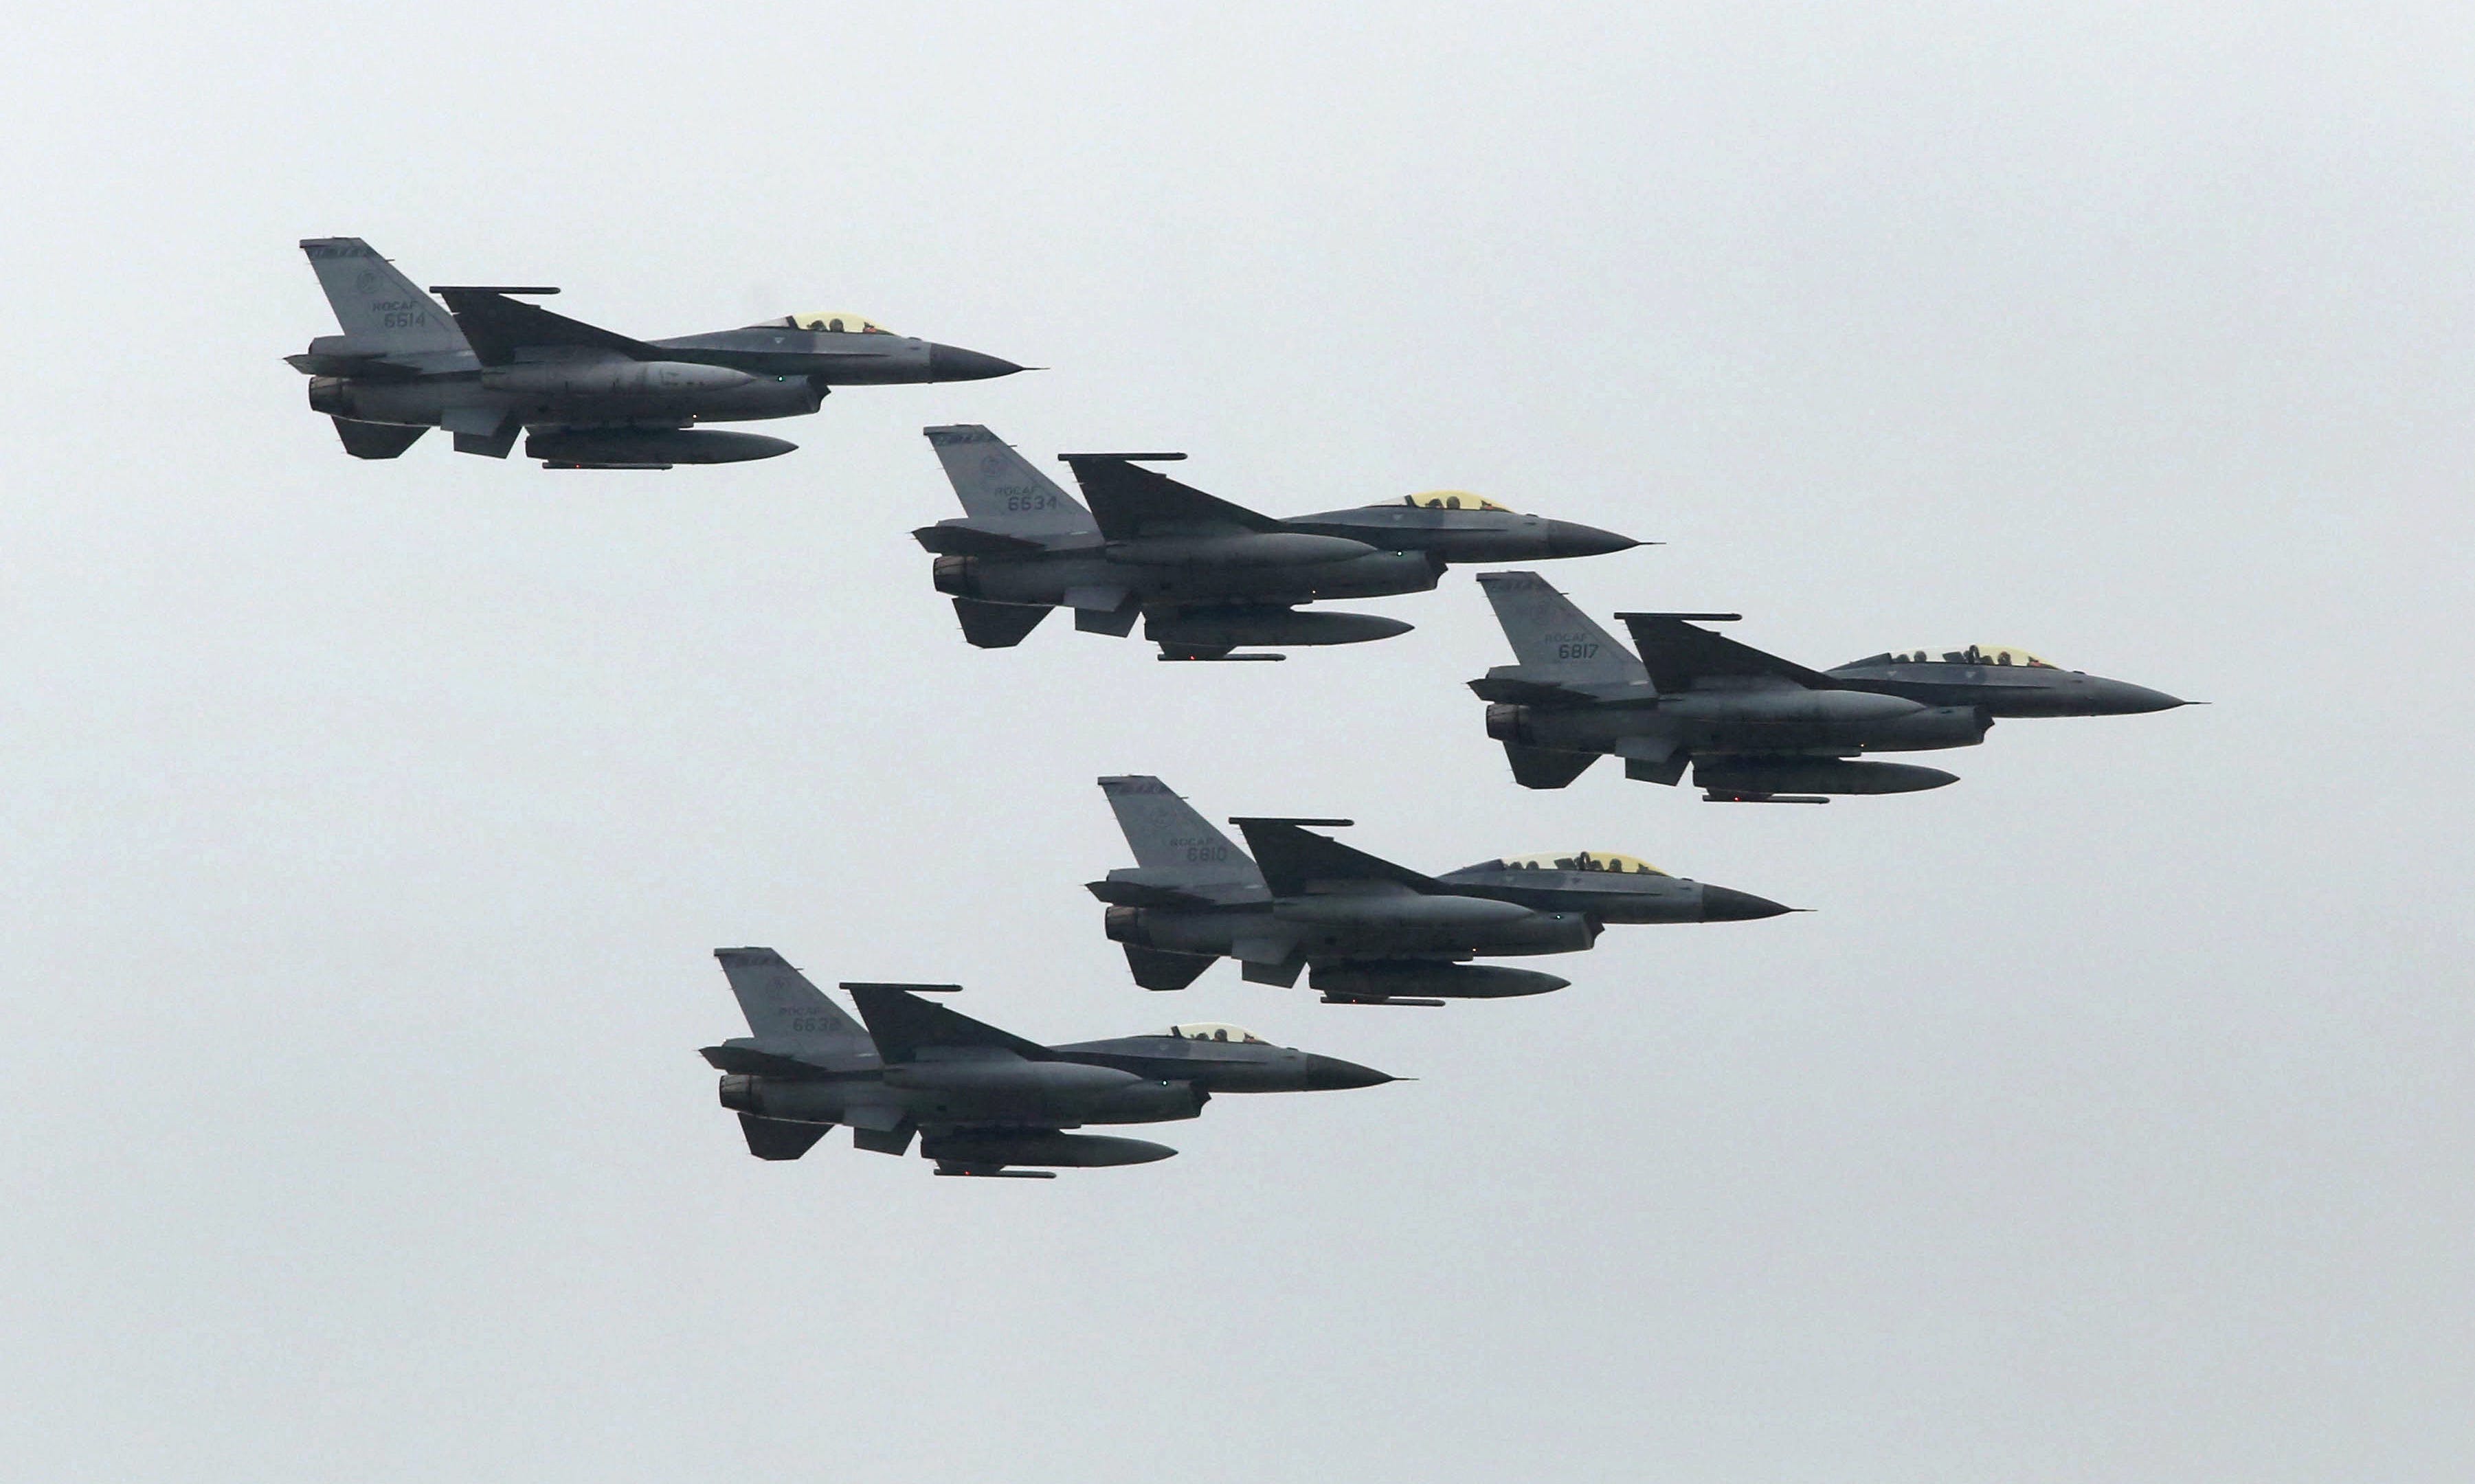 Taiwan Officially Makes Request to Buy New Fighter Jets From United States